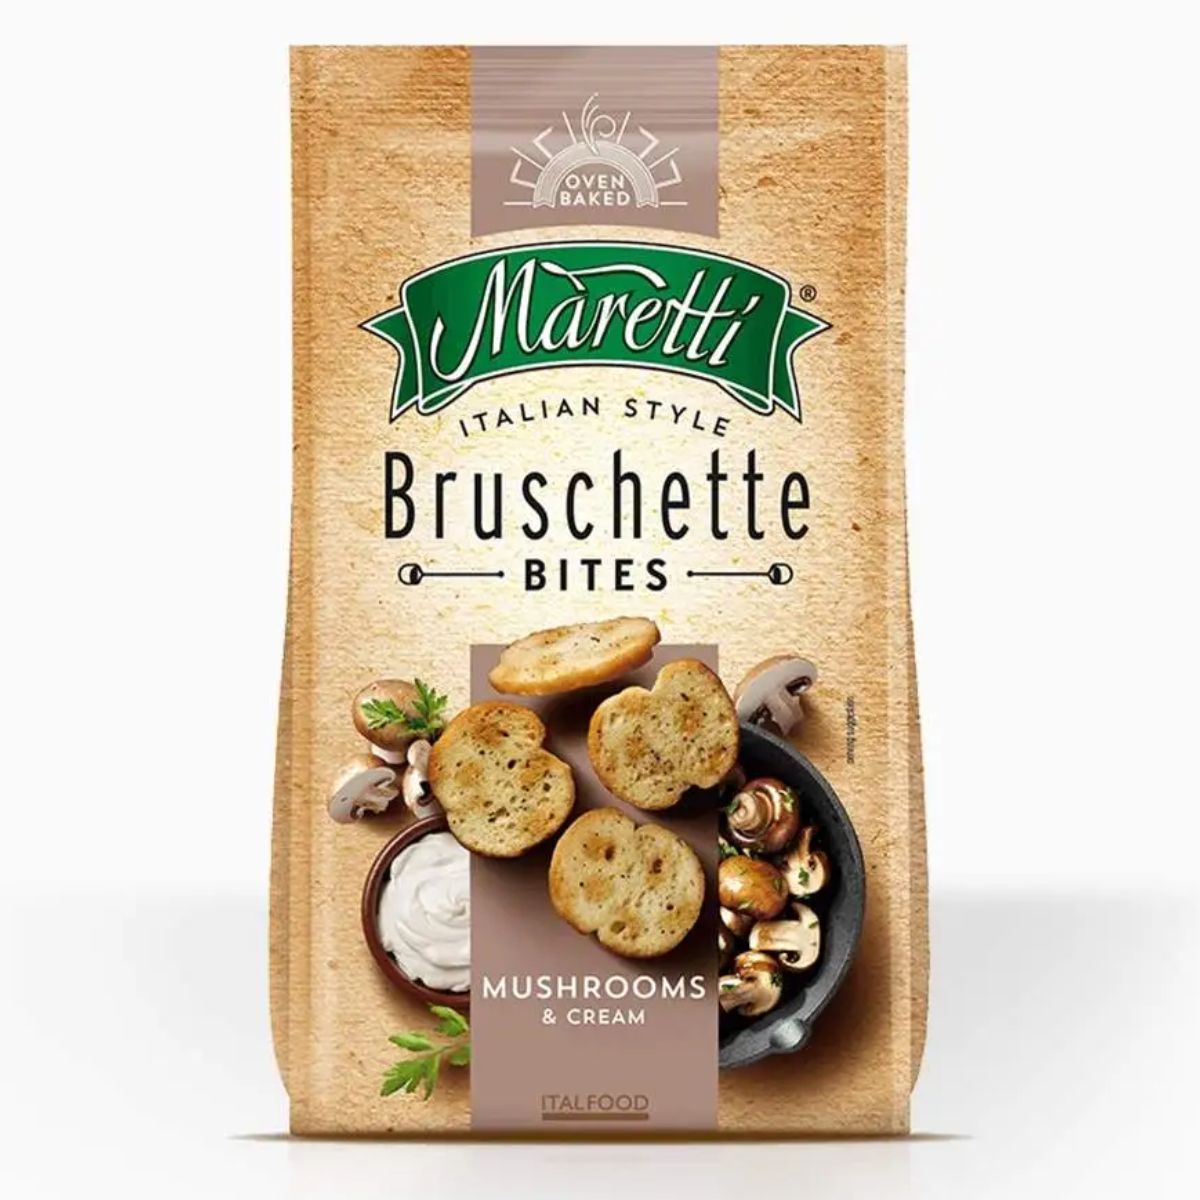 A package of Maretti Bruschette Mushrooms and Cream bites, displayed with images of the snack and ingredients on the front.